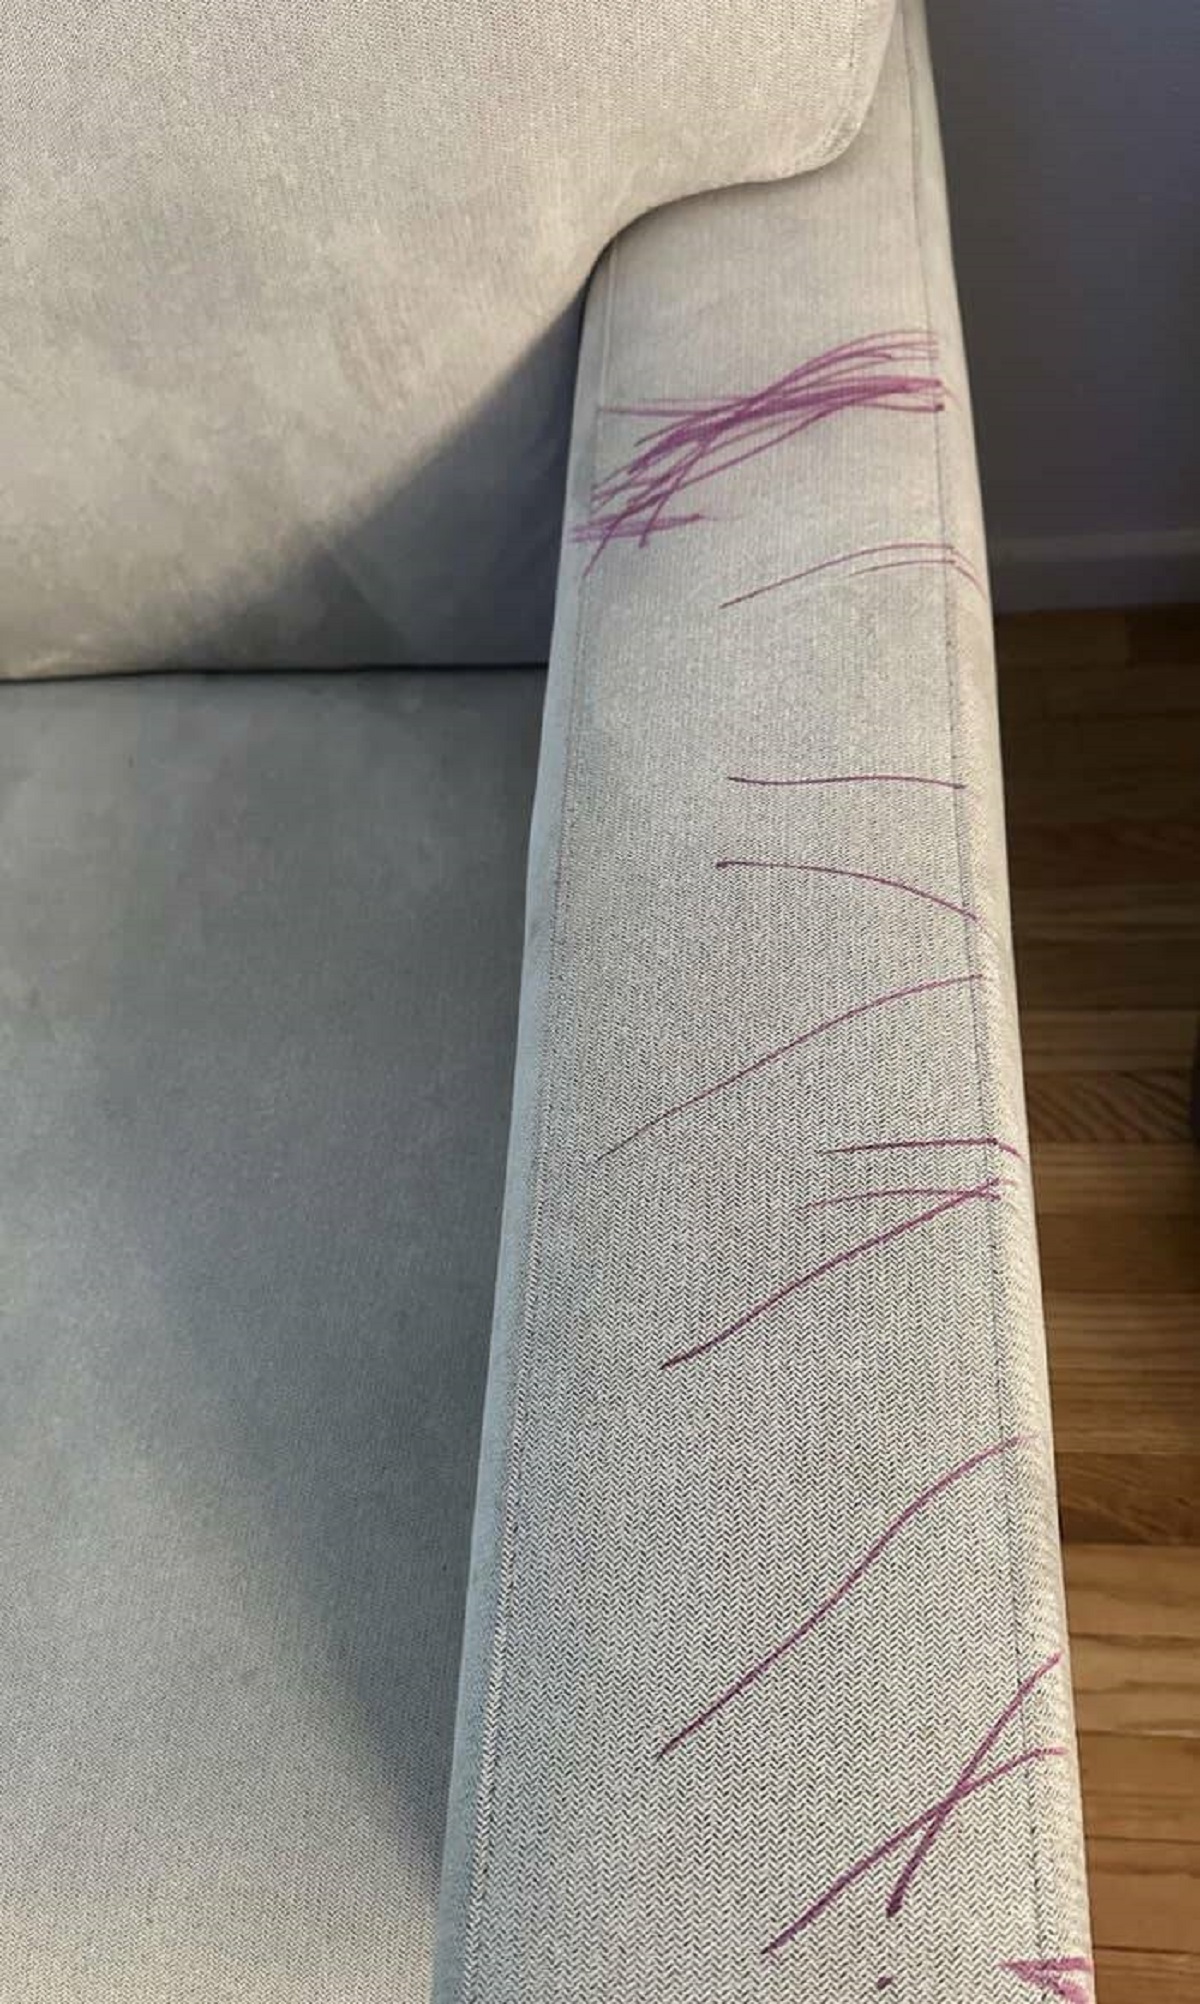 This parent's two-year-old son who found a purple permanent marker and drew a masterpiece on the new couch: